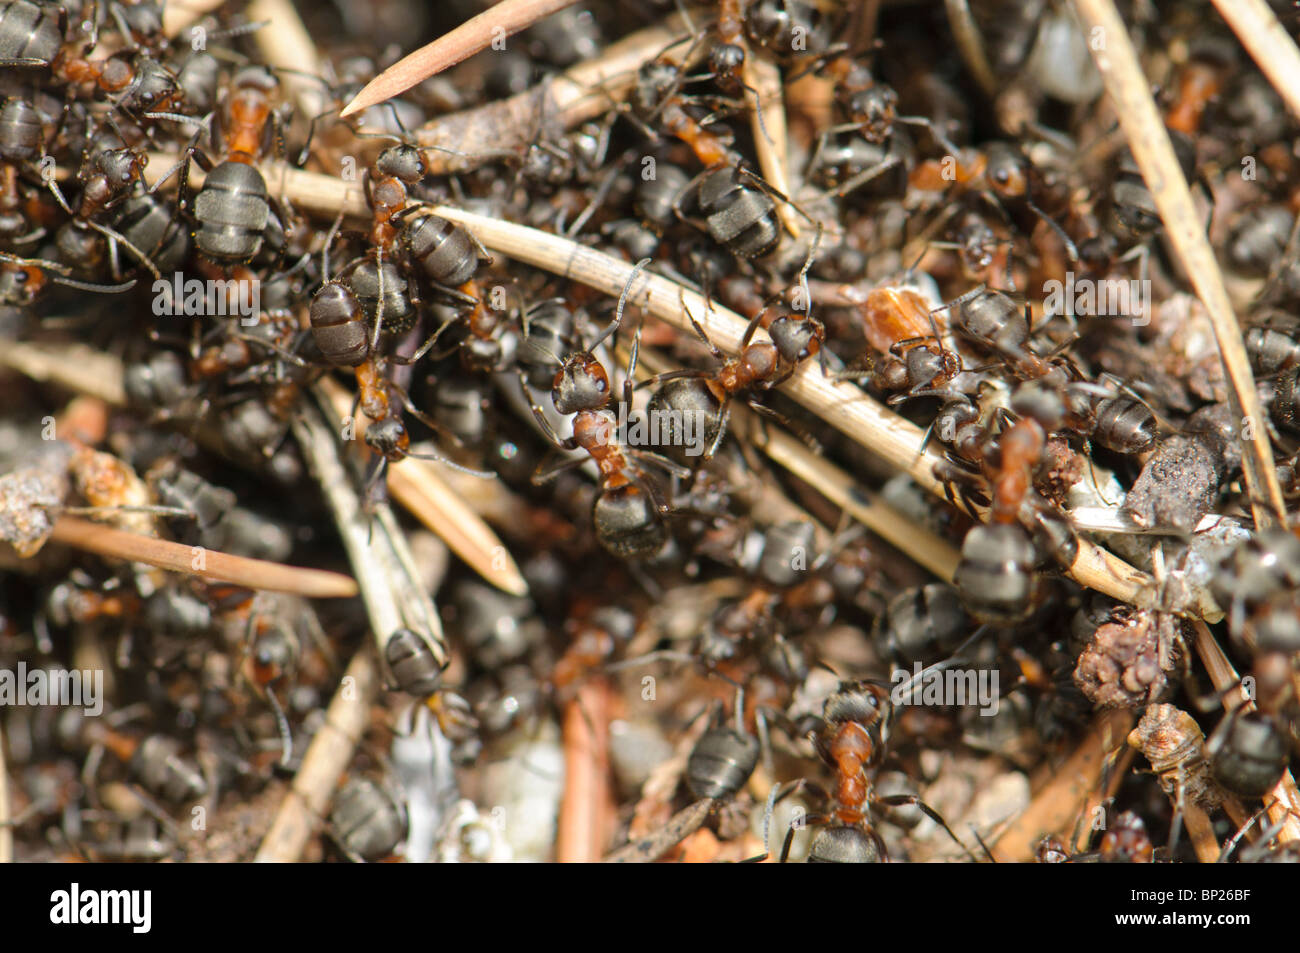 Anthill of formica rufa, Pyrenees, Spain Stock Photo